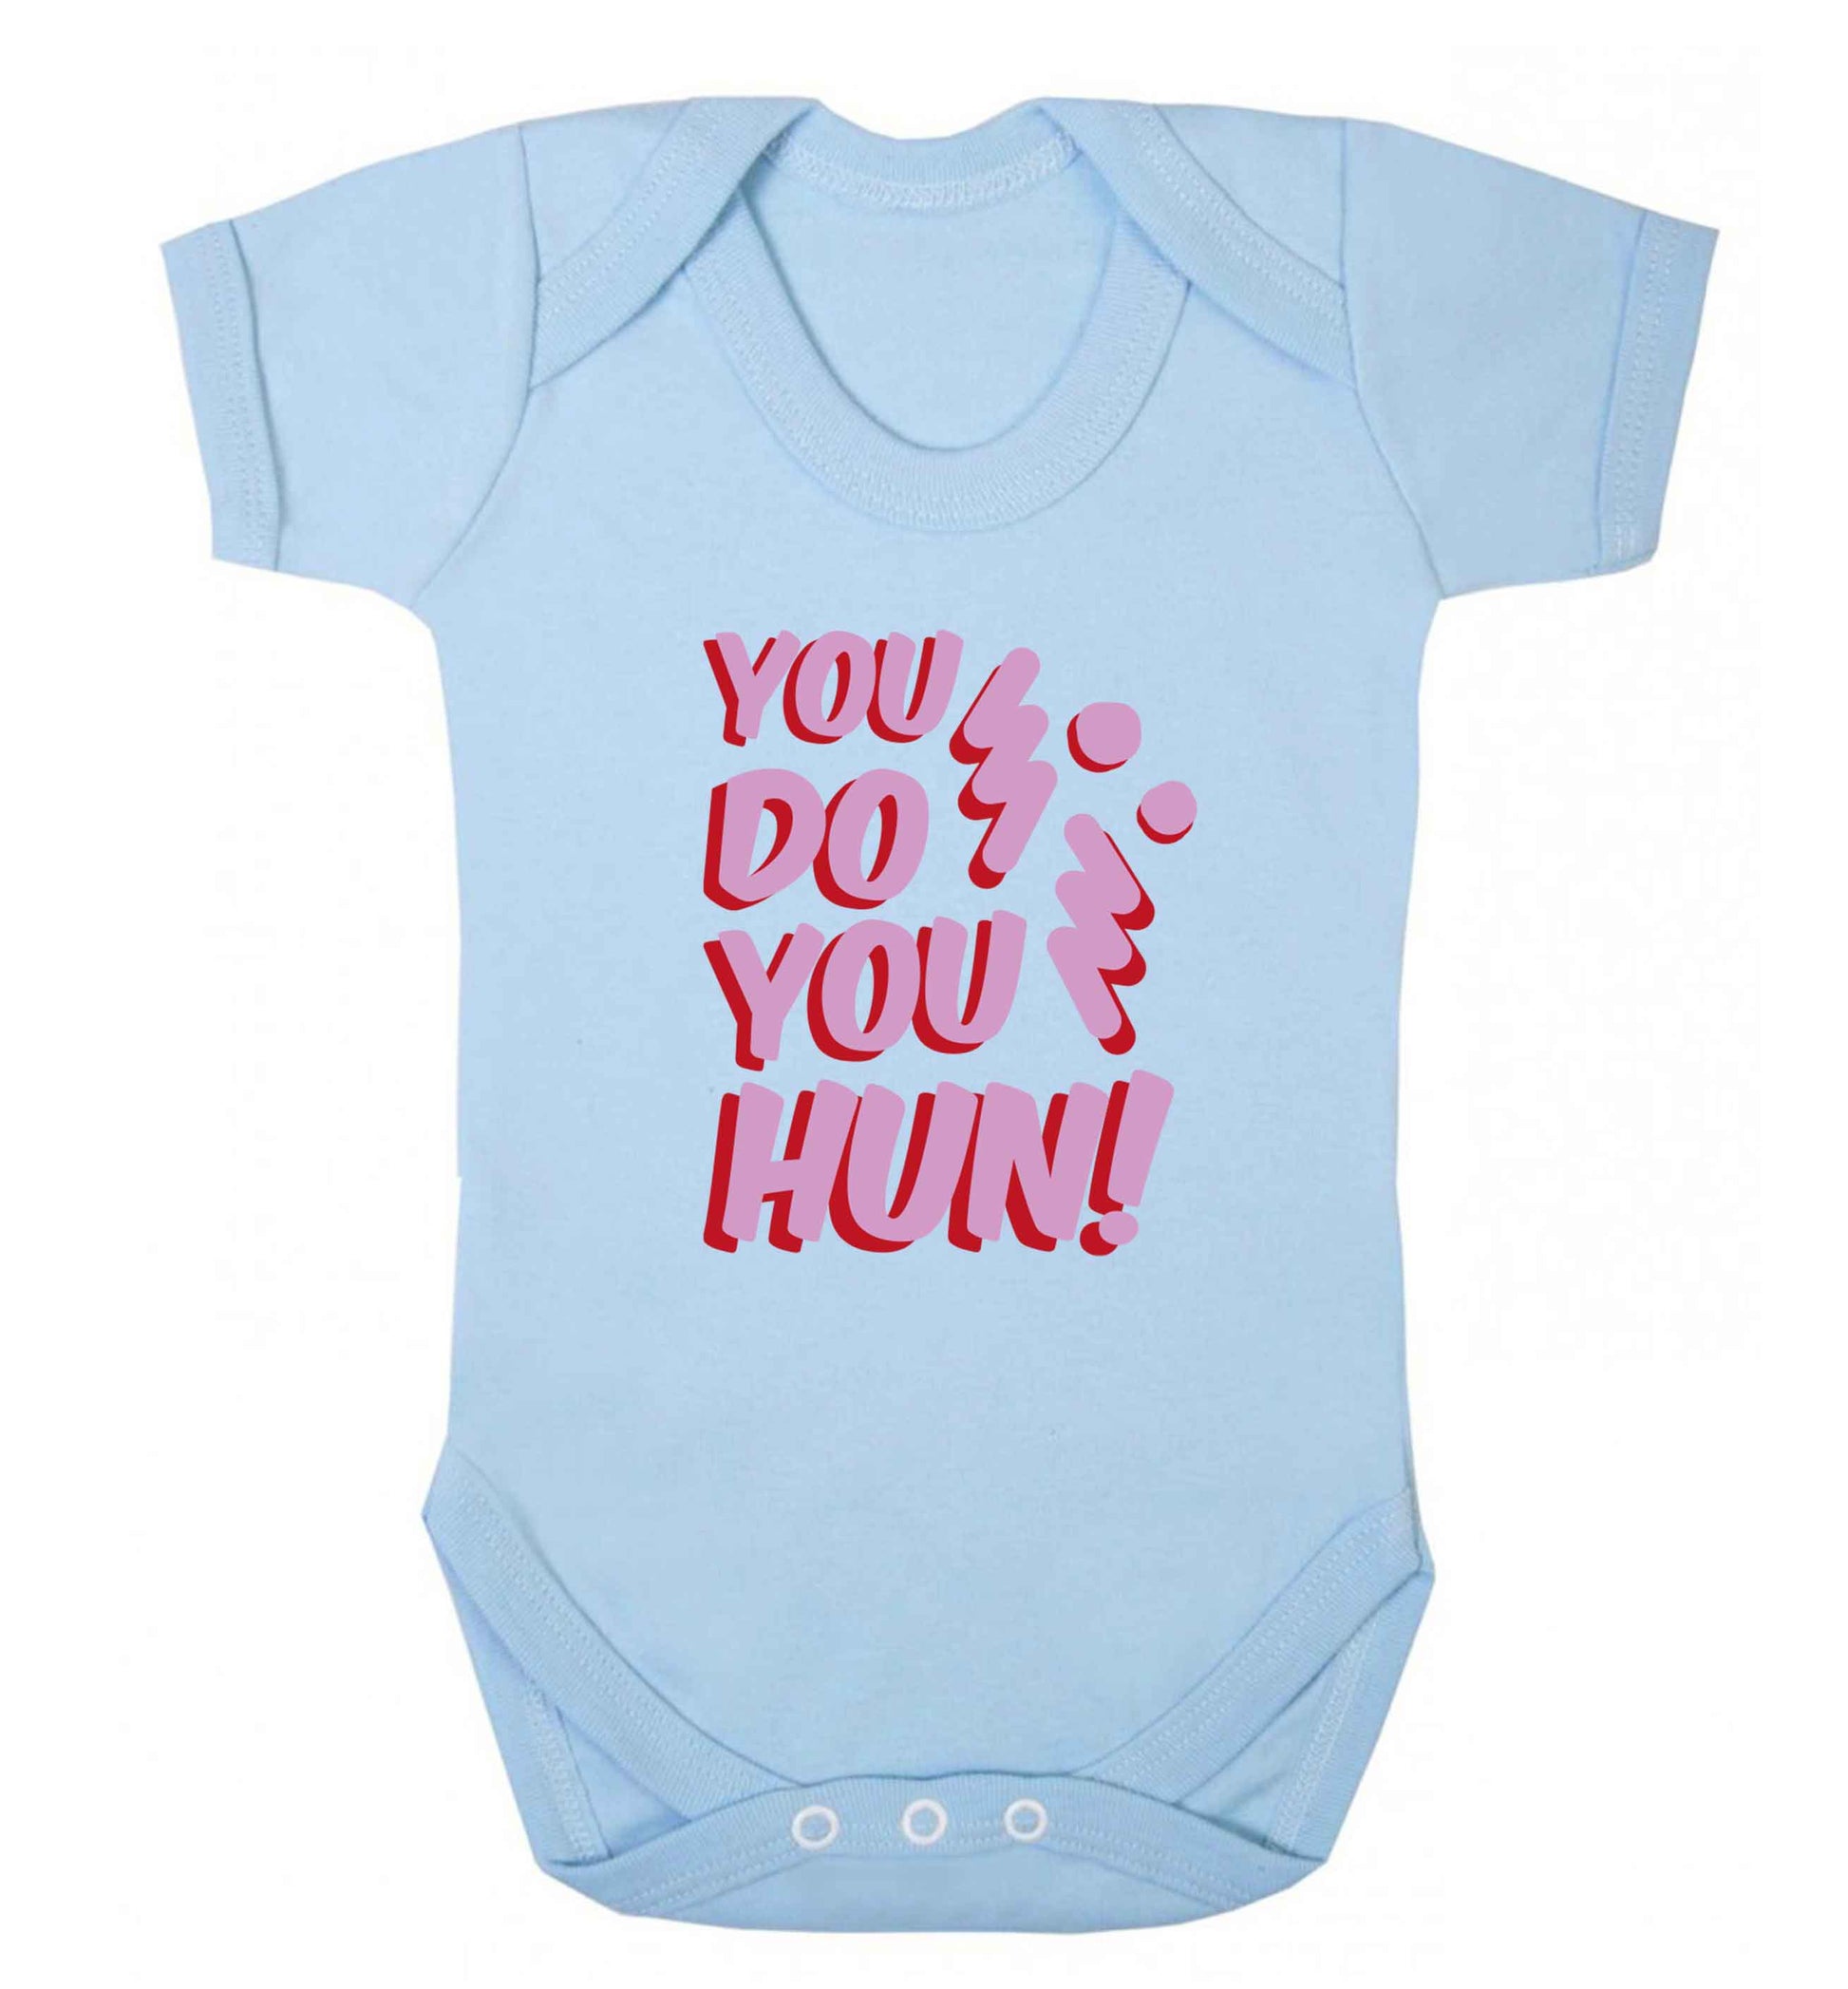 You do you hun baby vest pale blue 18-24 months